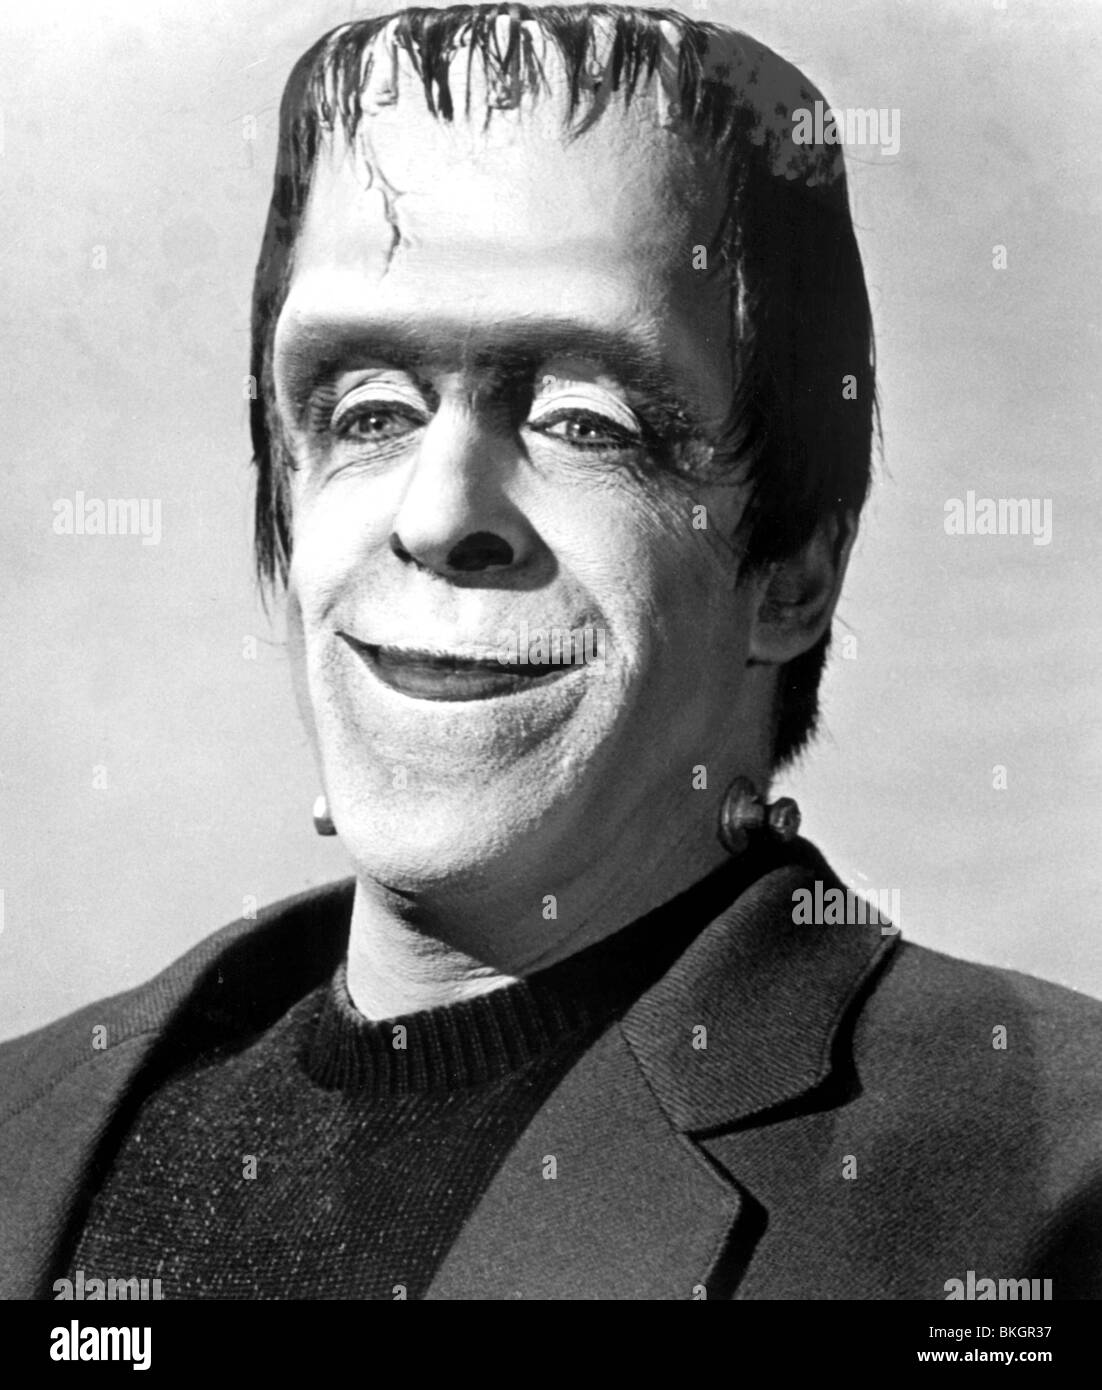 THE MUNSTERS (TV) FRED GYWNNE Stock Photo